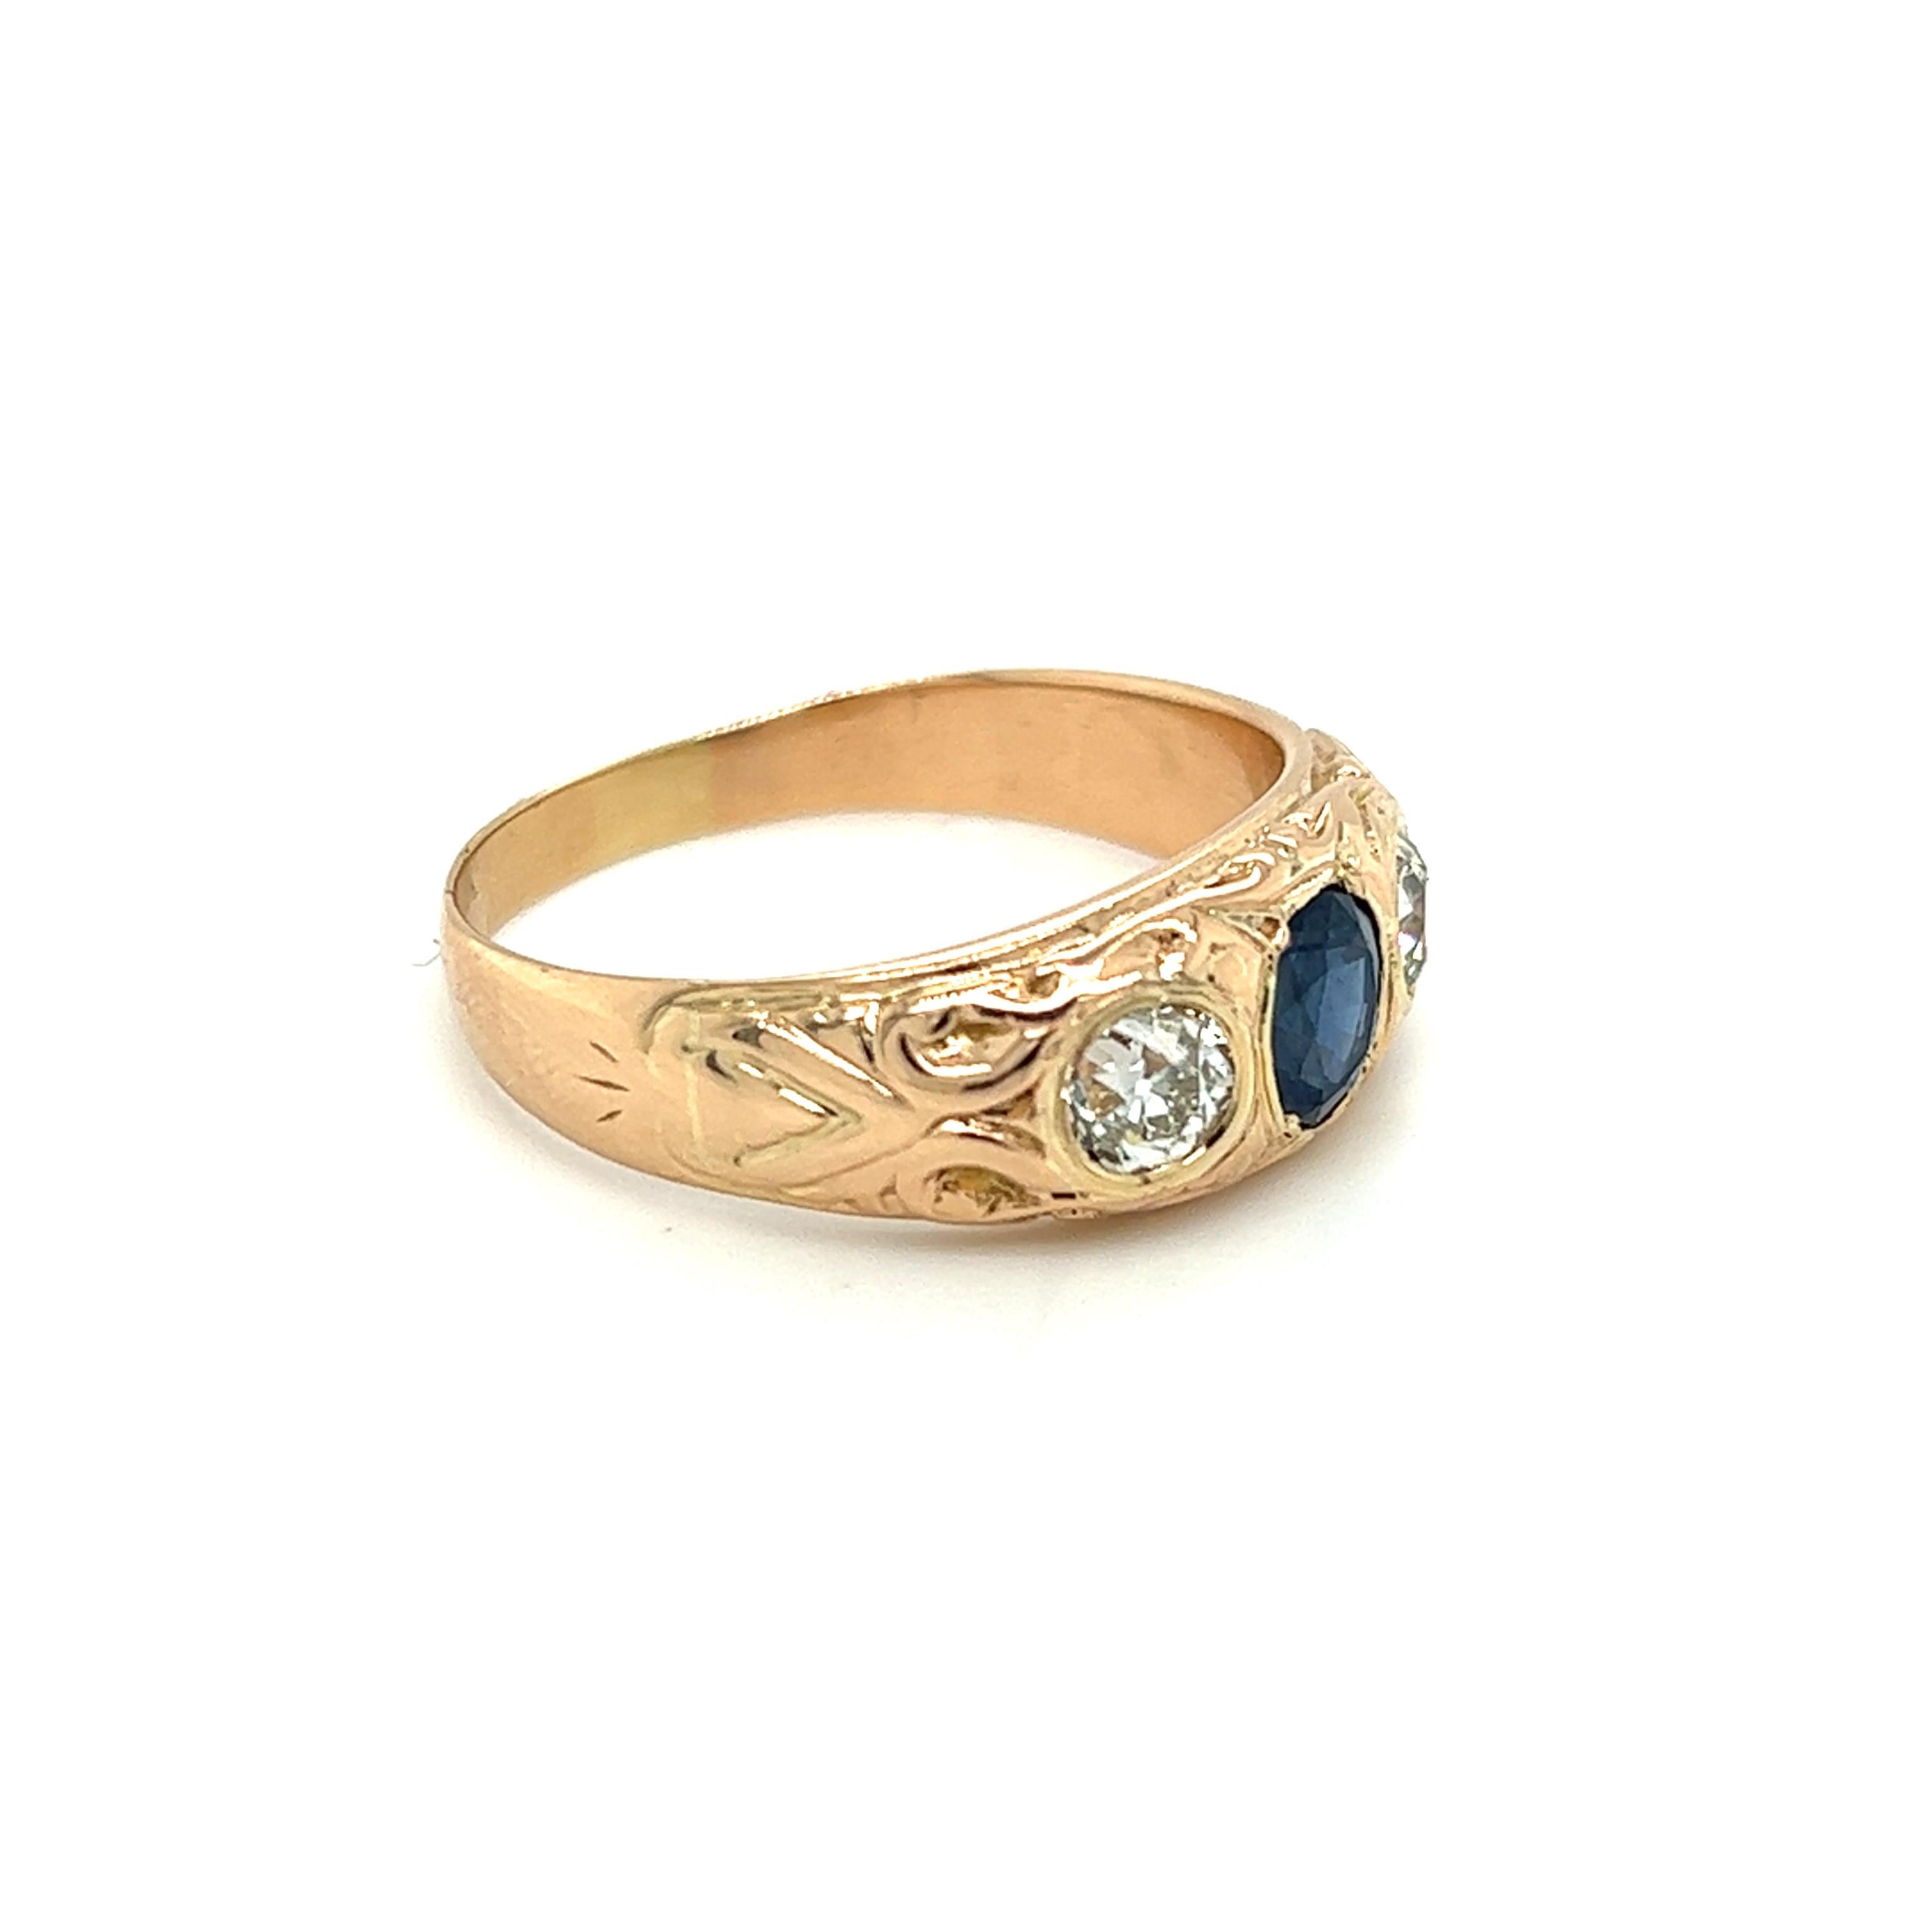 Edwardian Sapphire and Old Mine Cut Diamond Ring in 14k Gold In Good Condition For Sale In Towson, MD